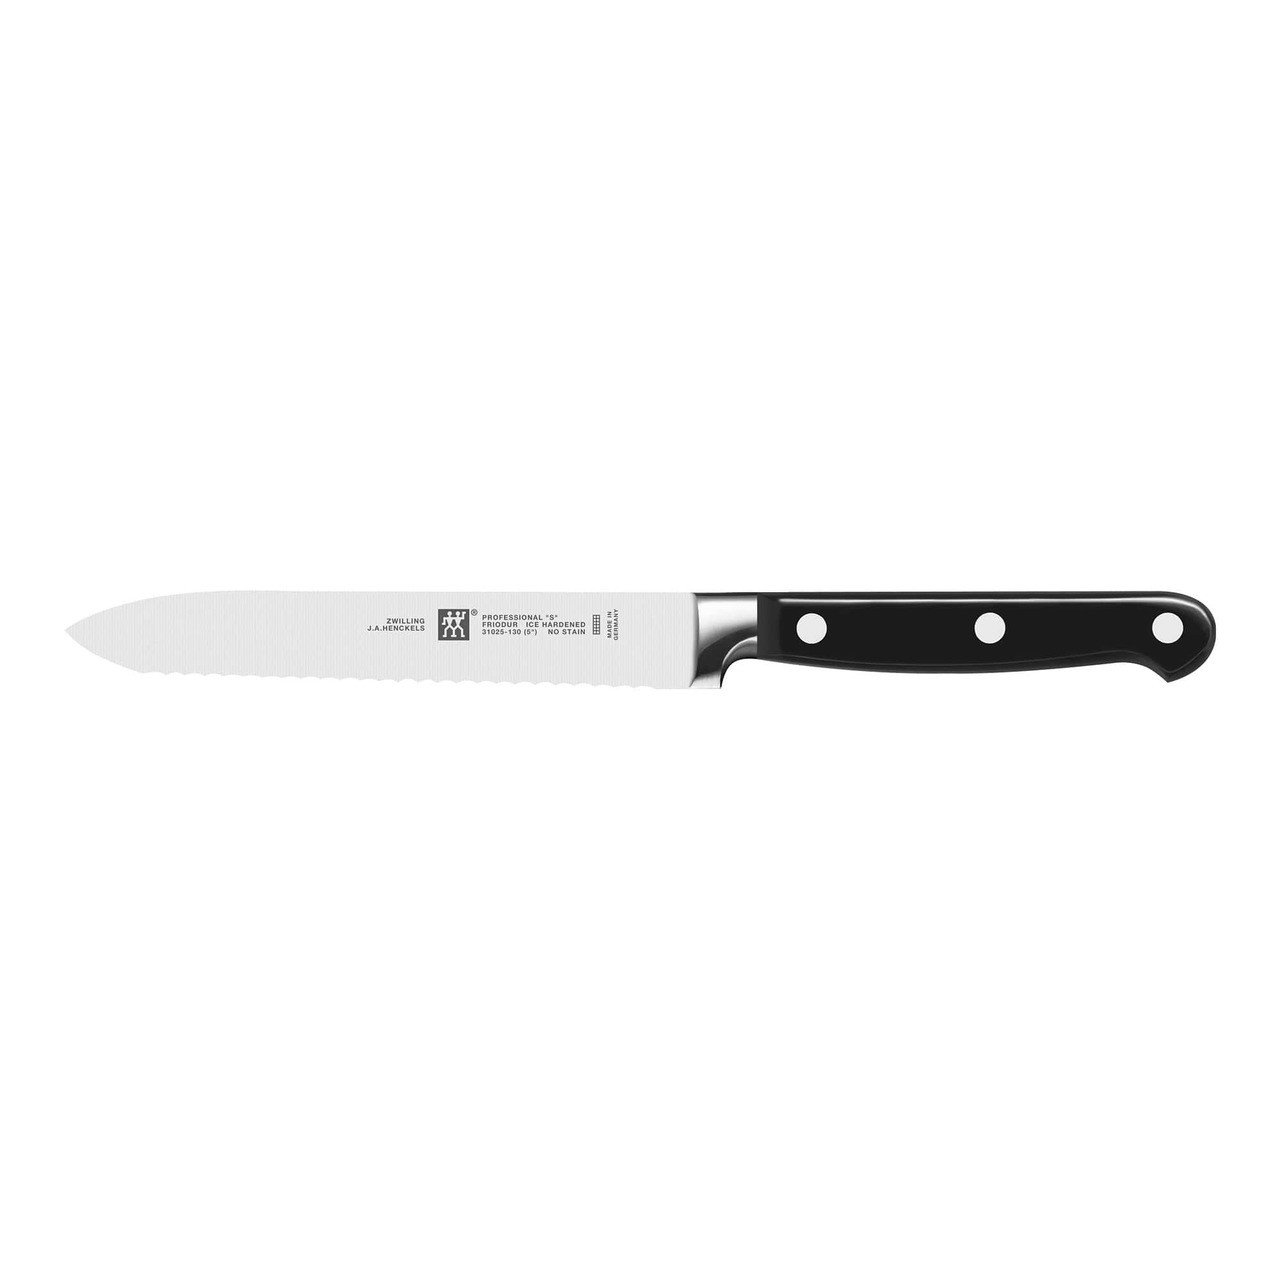 https://cdn11.bigcommerce.com/s-hccytny0od/images/stencil/1280x1280/products/605/699/zwilling-ja-henckels-professional-s-serrated-utility-knife__94655.1509752110.jpg?c=2?imbypass=on